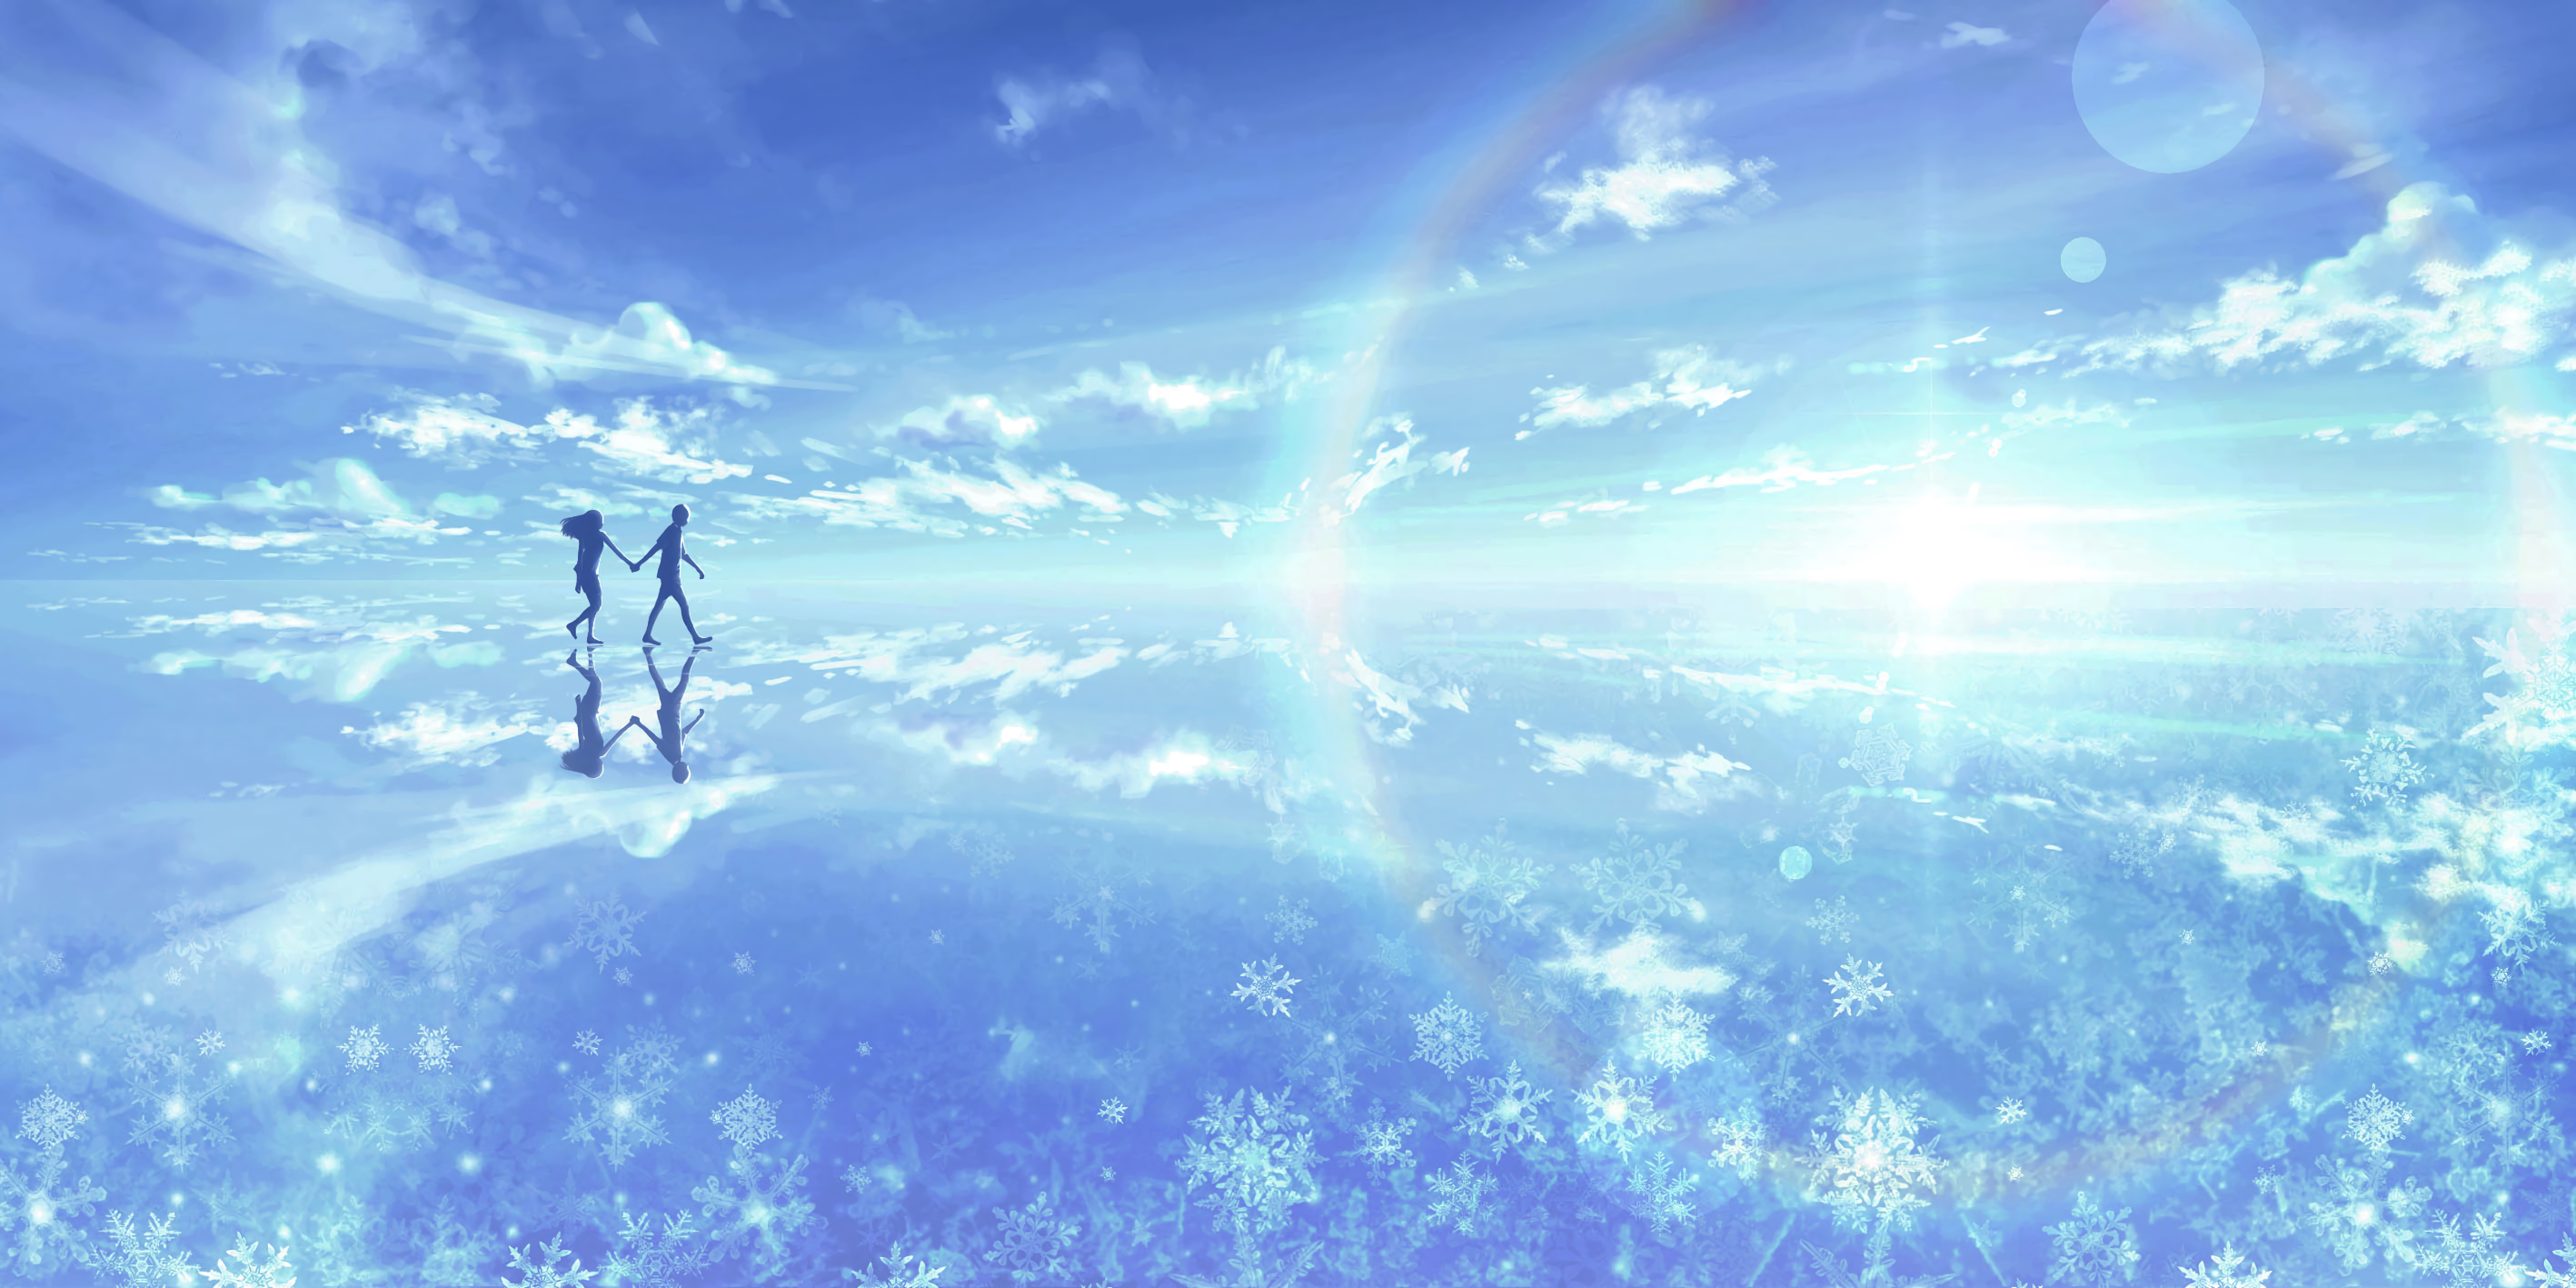 Anime 2835x1417 anime anime girls holding hands snowflakes sky reflection silhouette clouds walking